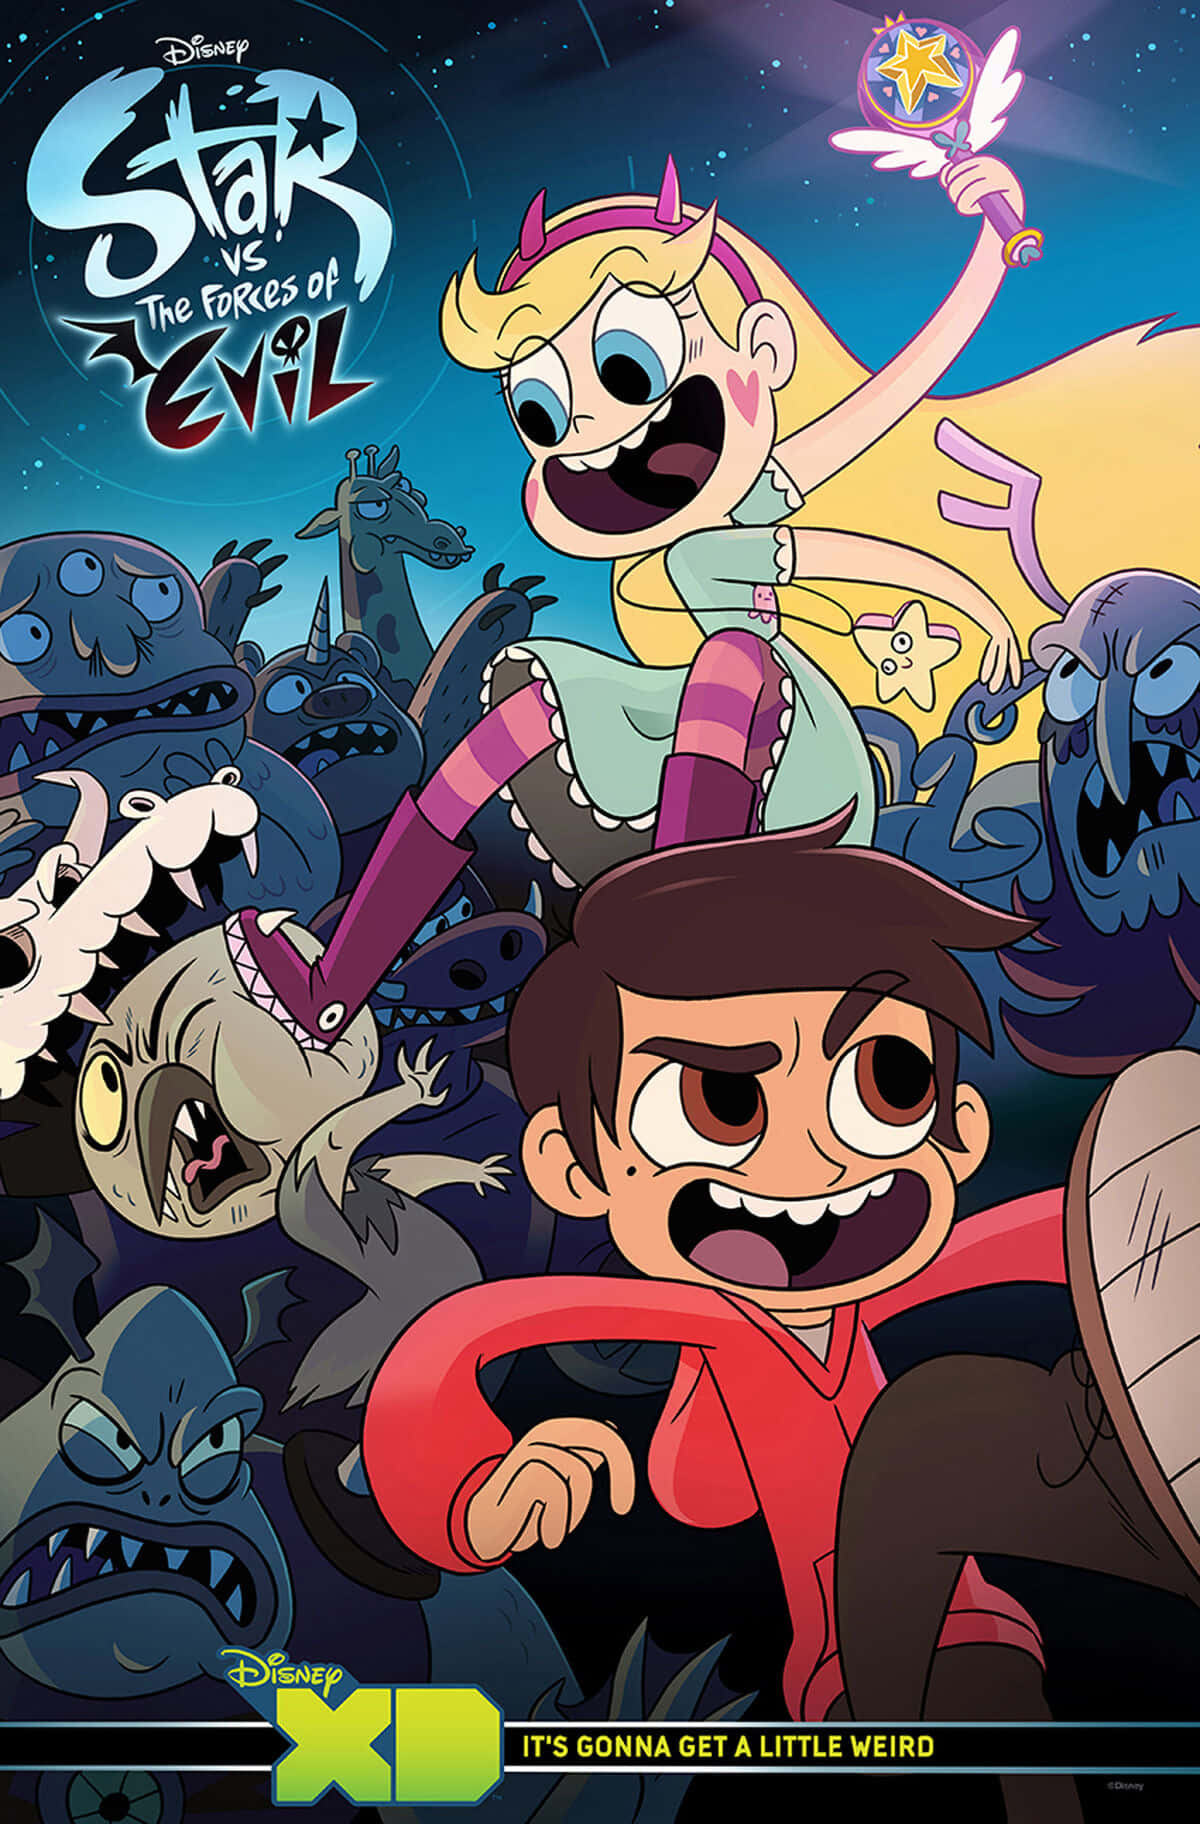 Star Butterfly And Marco Diaz In A Magical Adventure From Star Vs The Forces Of Evil.